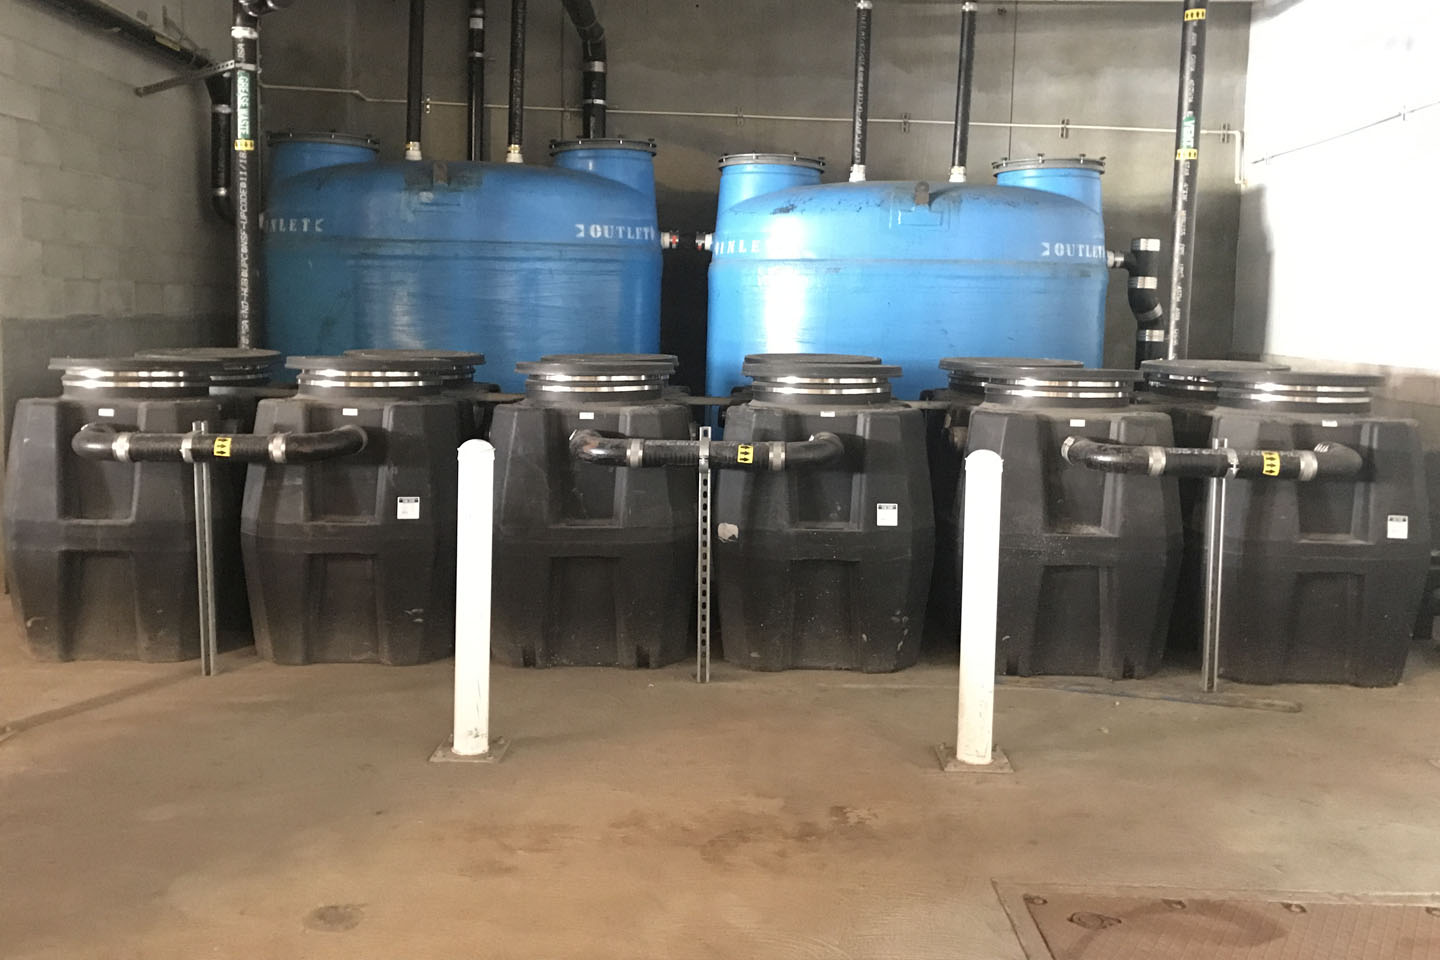 grease Trap Cleaning Service.  Used Cooking Oil Collection, Restaurant Grease Traps Service In Anahiem, Fullerton, Tustin, Irvine, Huntington Beach